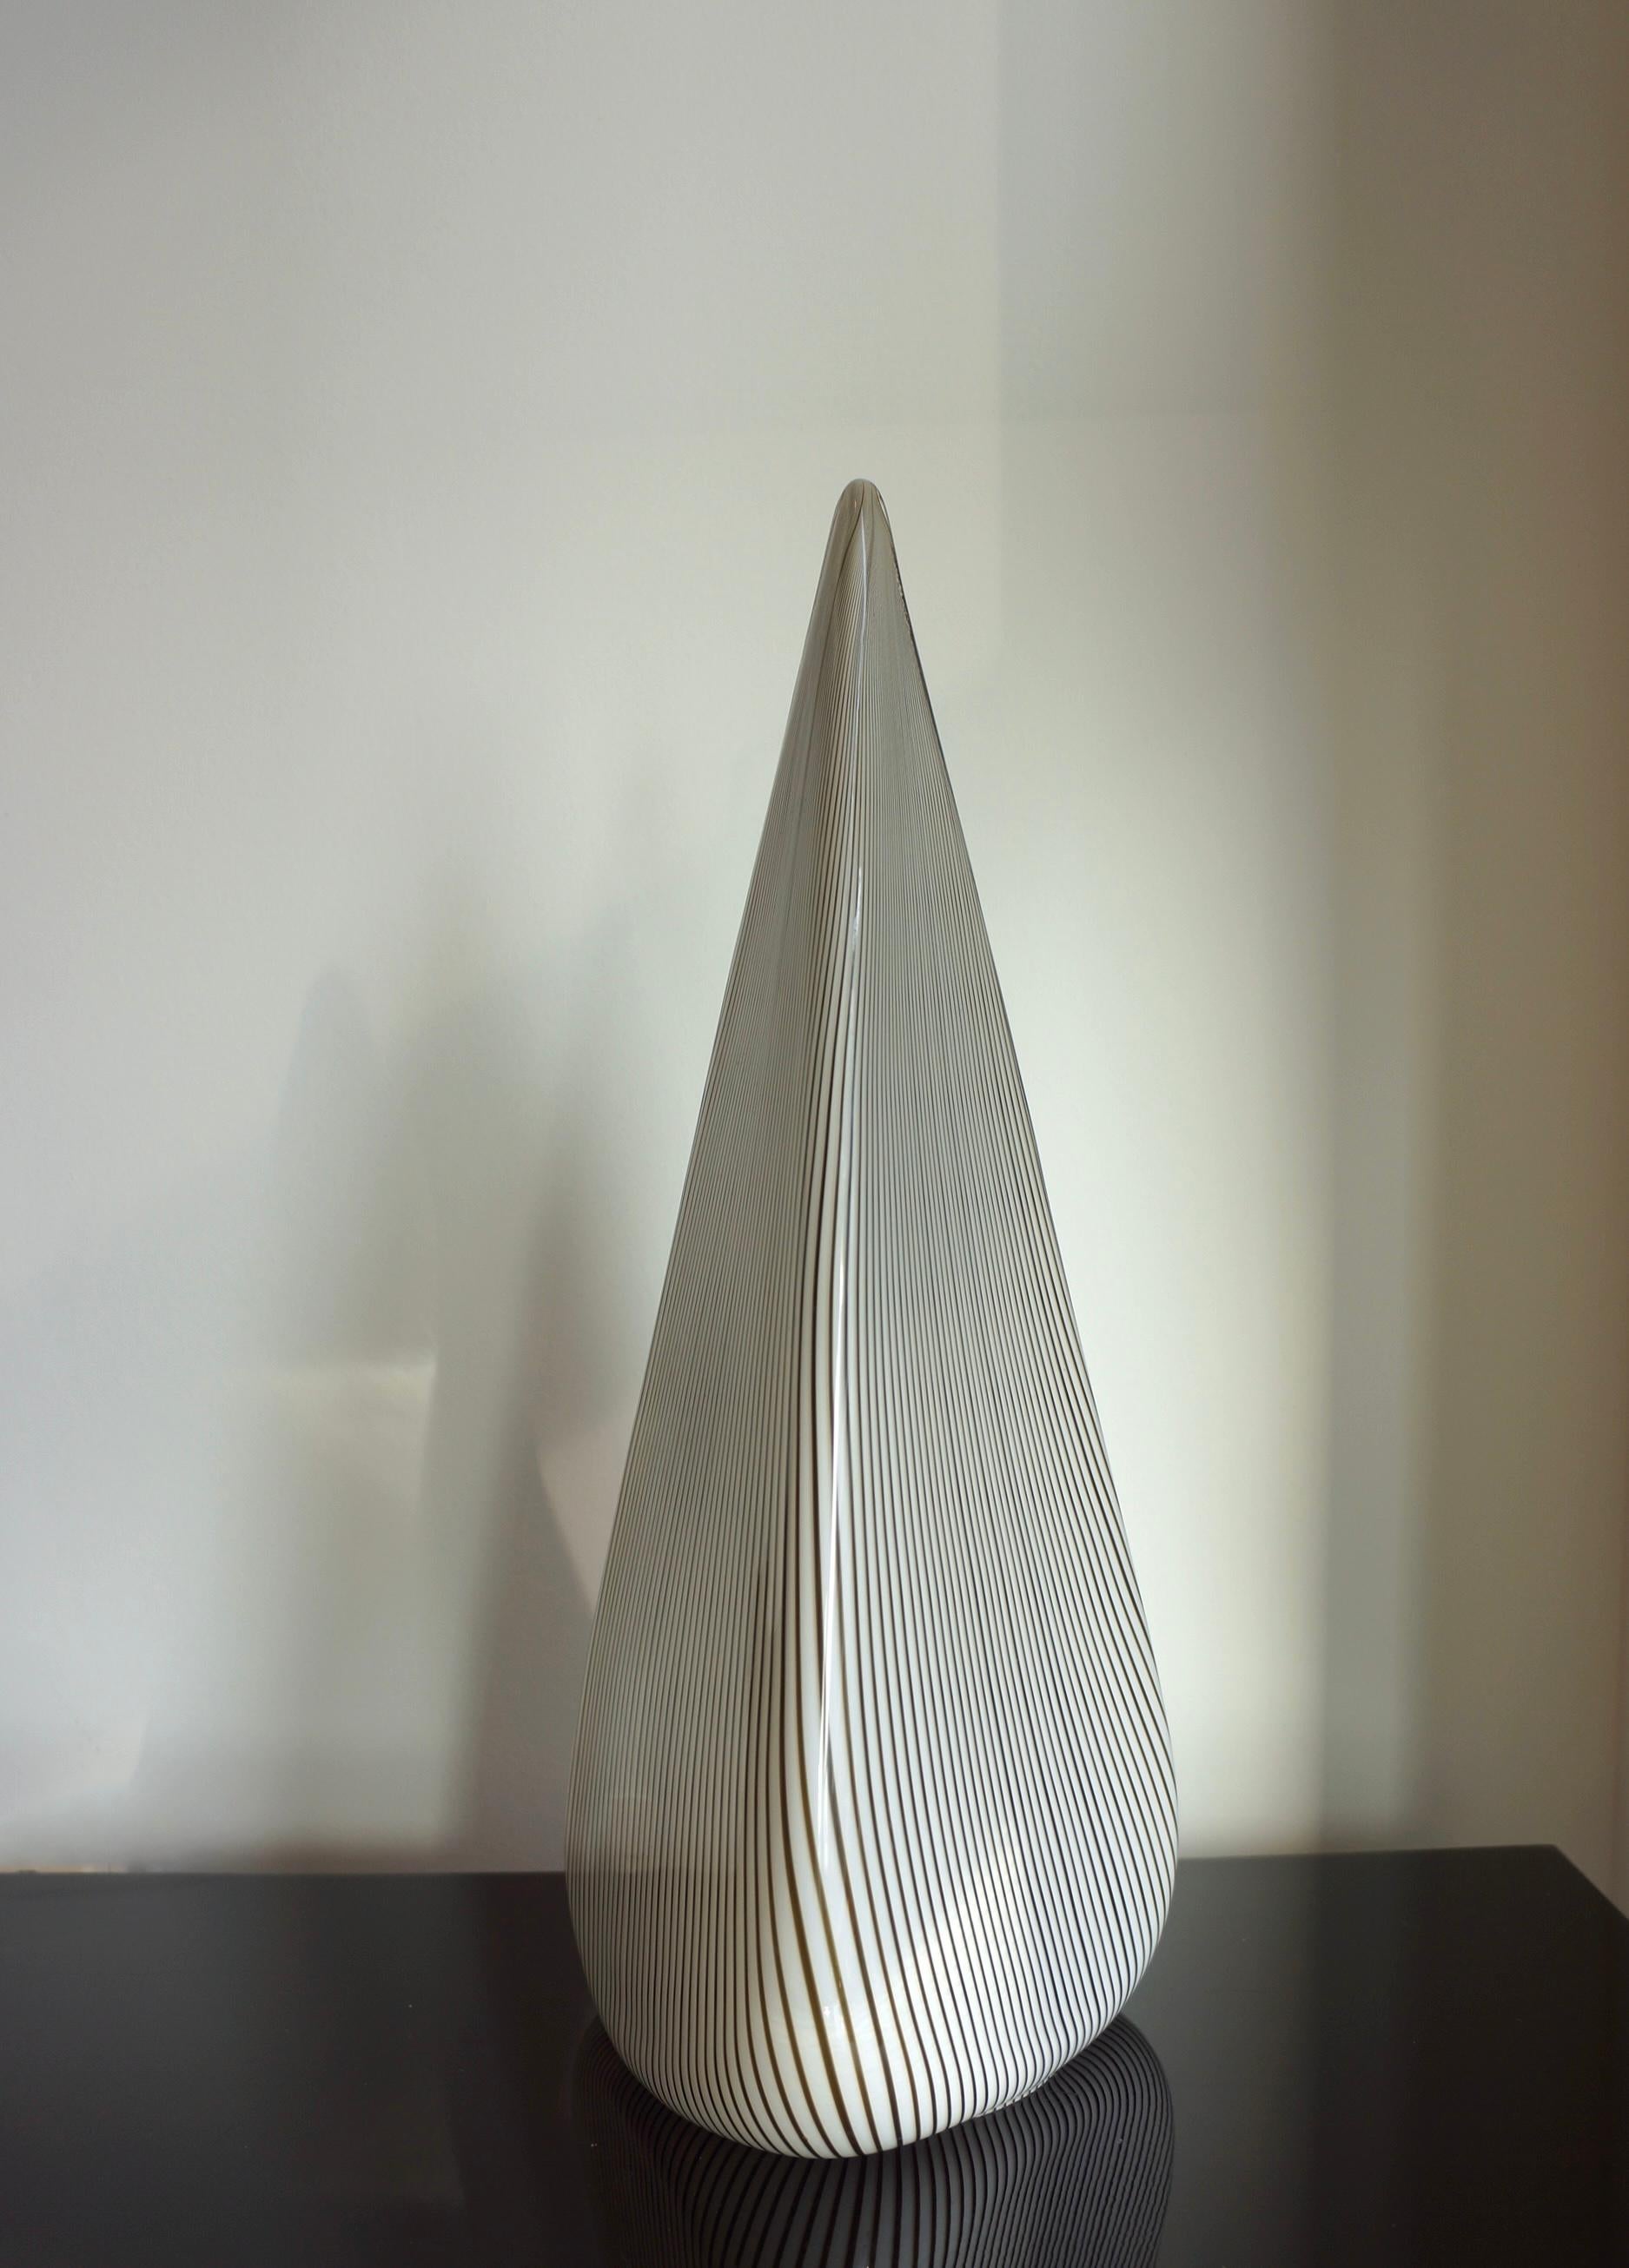 Unique Murano art glass table lamp by Lino Tagliapietra made in the 1970s. This distinctive Murano lamp is shaped in a stretched triangular figure with thin lines of brown and black glass running vertically throughout the piece. The 'Filigrana'